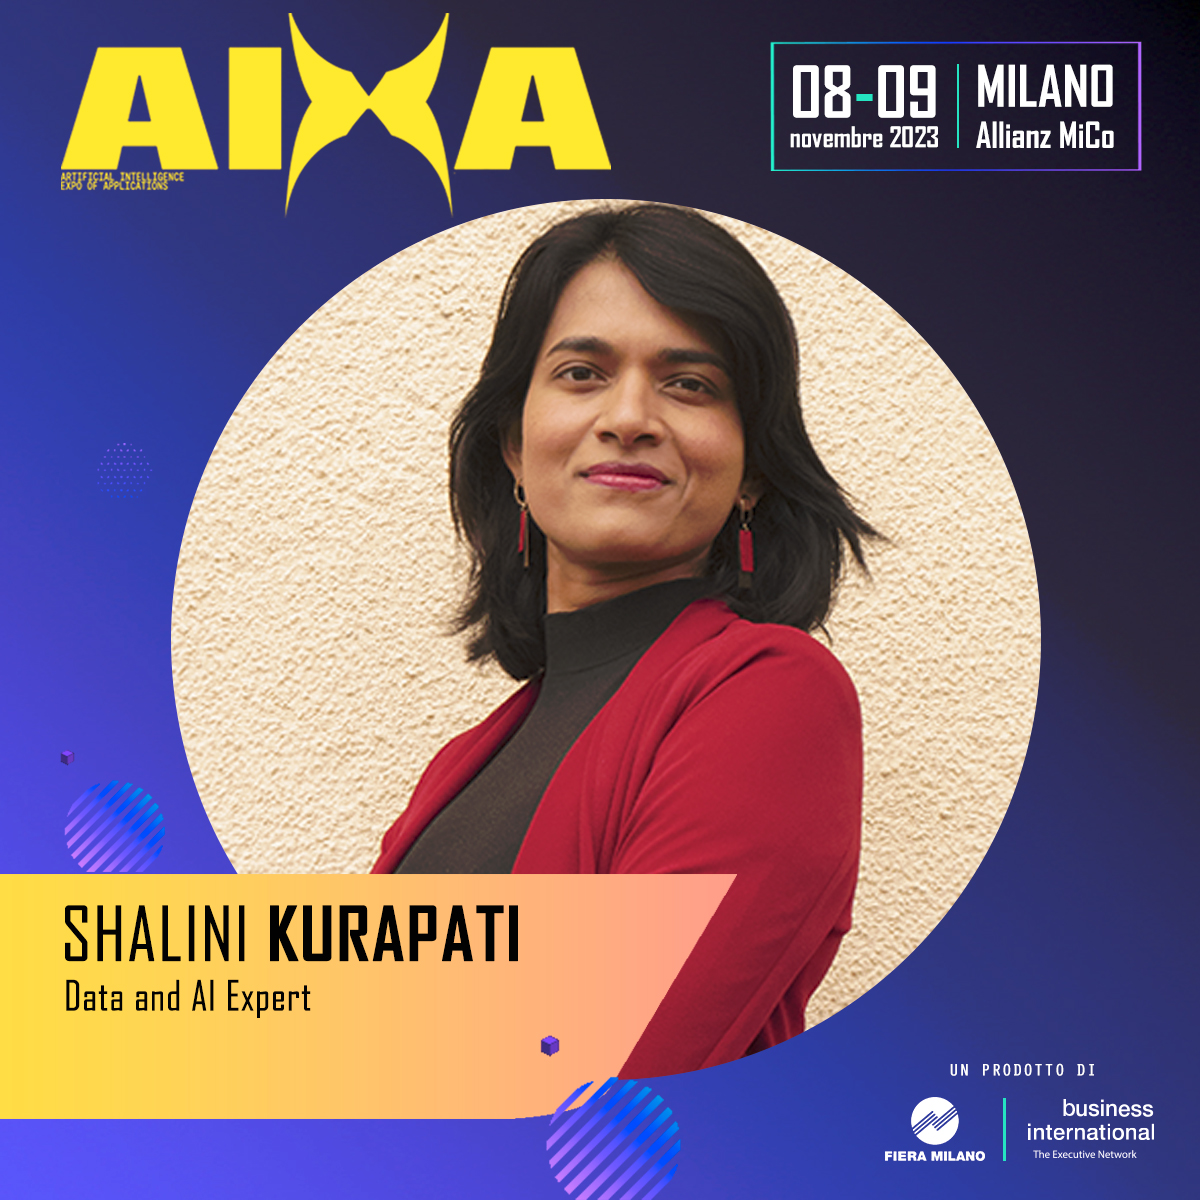 On Nov 8th, our CEO @shalini_kr will take part in the roundtable about the state of the art and developments of AI applications in Italy as #Data and AI Expert at #AIXA, the event about #AI applications organized by @BIweb and @FieraMilanoSpa 👉 businessinternational.it/Eventi/4858/AI…